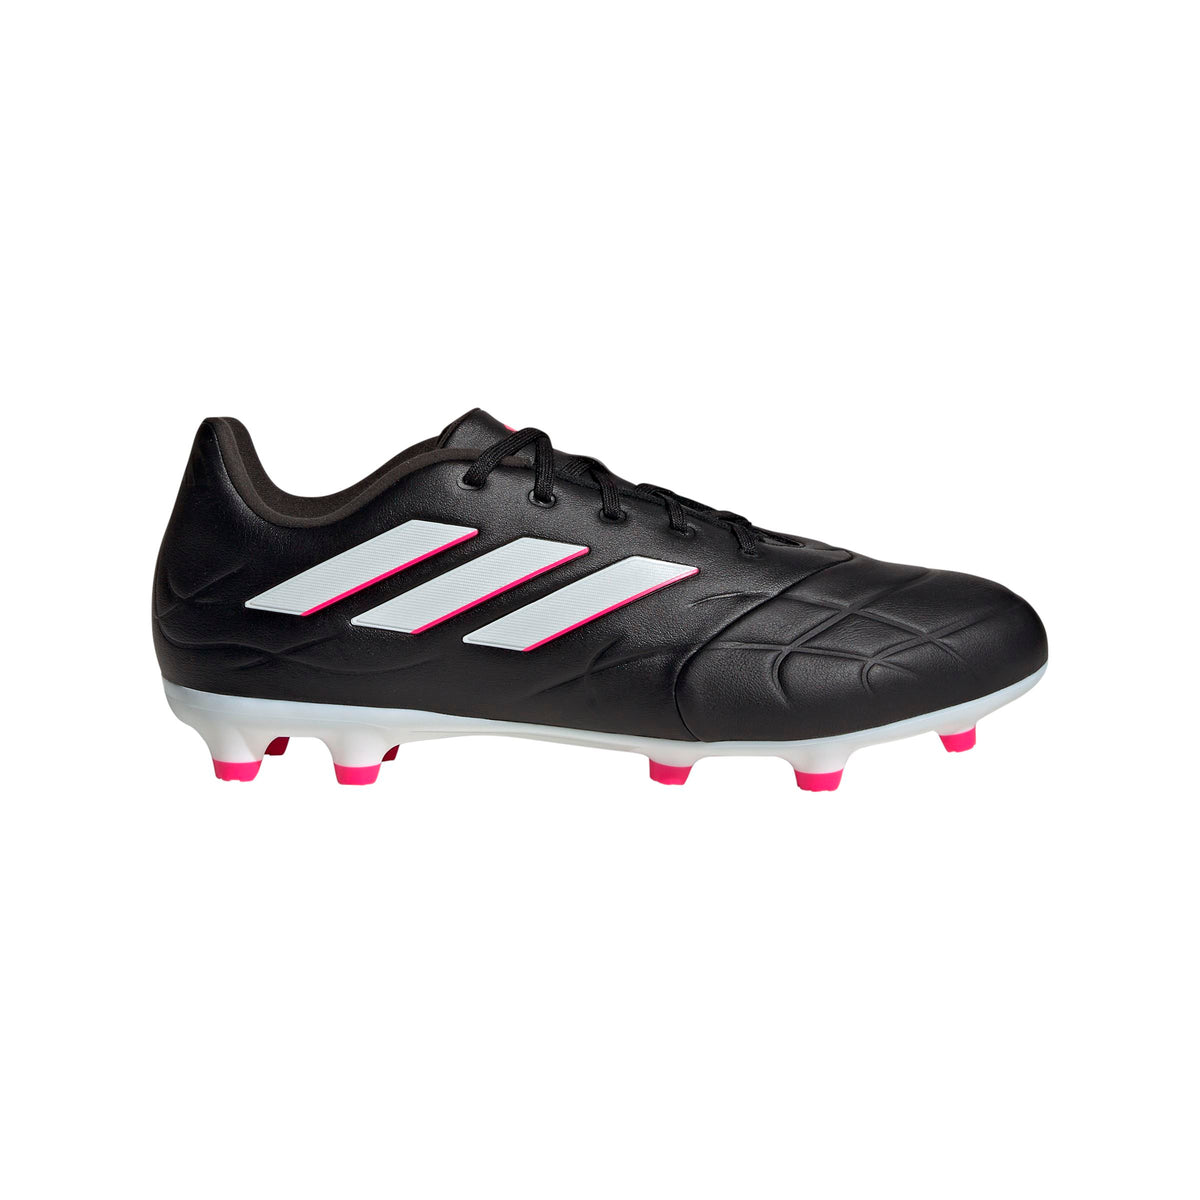 adidas Unisex Copa Pure.3 Firm Ground Cleats | HQ8942 Cleats Adidas 6 Core Black / Zero Met. / Team Shock Pink 2 